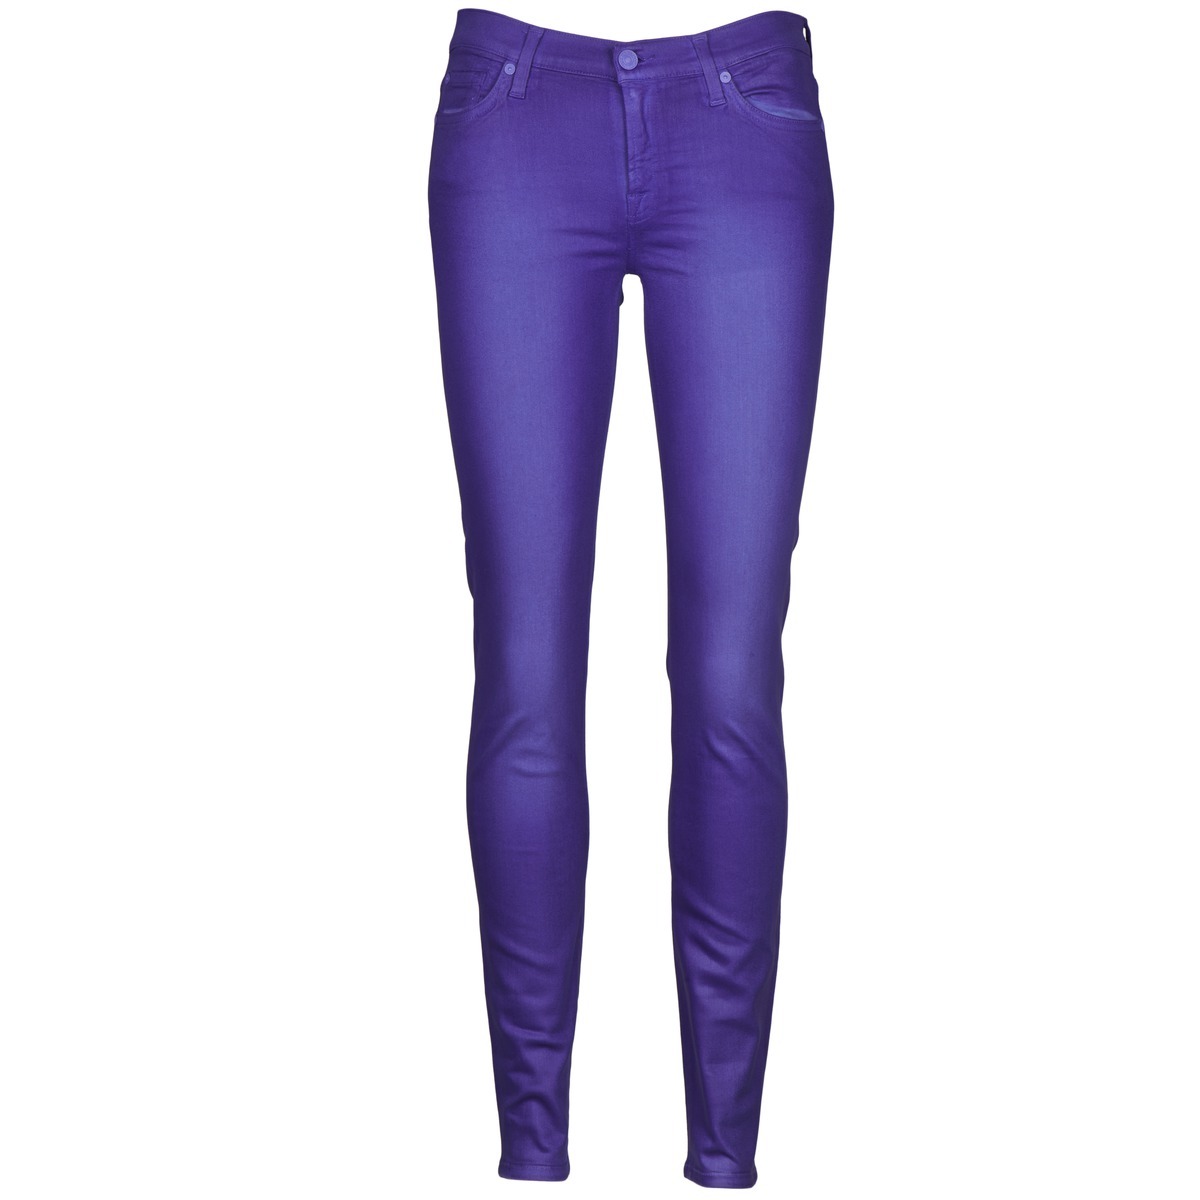 Spartoo - Women's Skinny Jeans - Purple - 7 For All Mankind GOOFASH